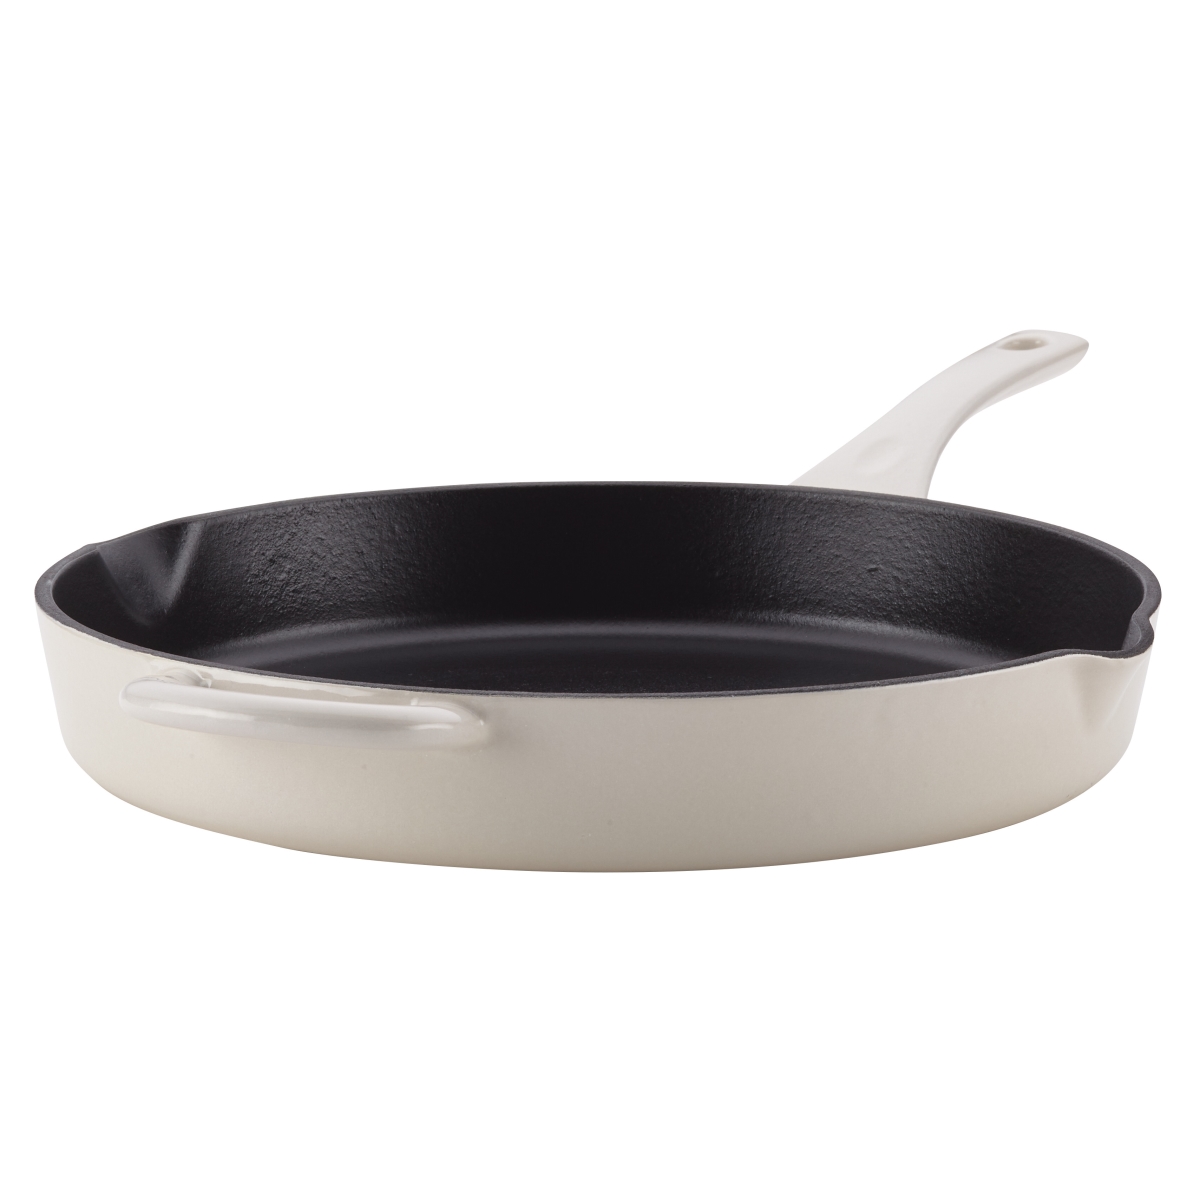 47434 Cast Iron Enamel Skillet With Pour Spouts, 10 In. - French Vanilla